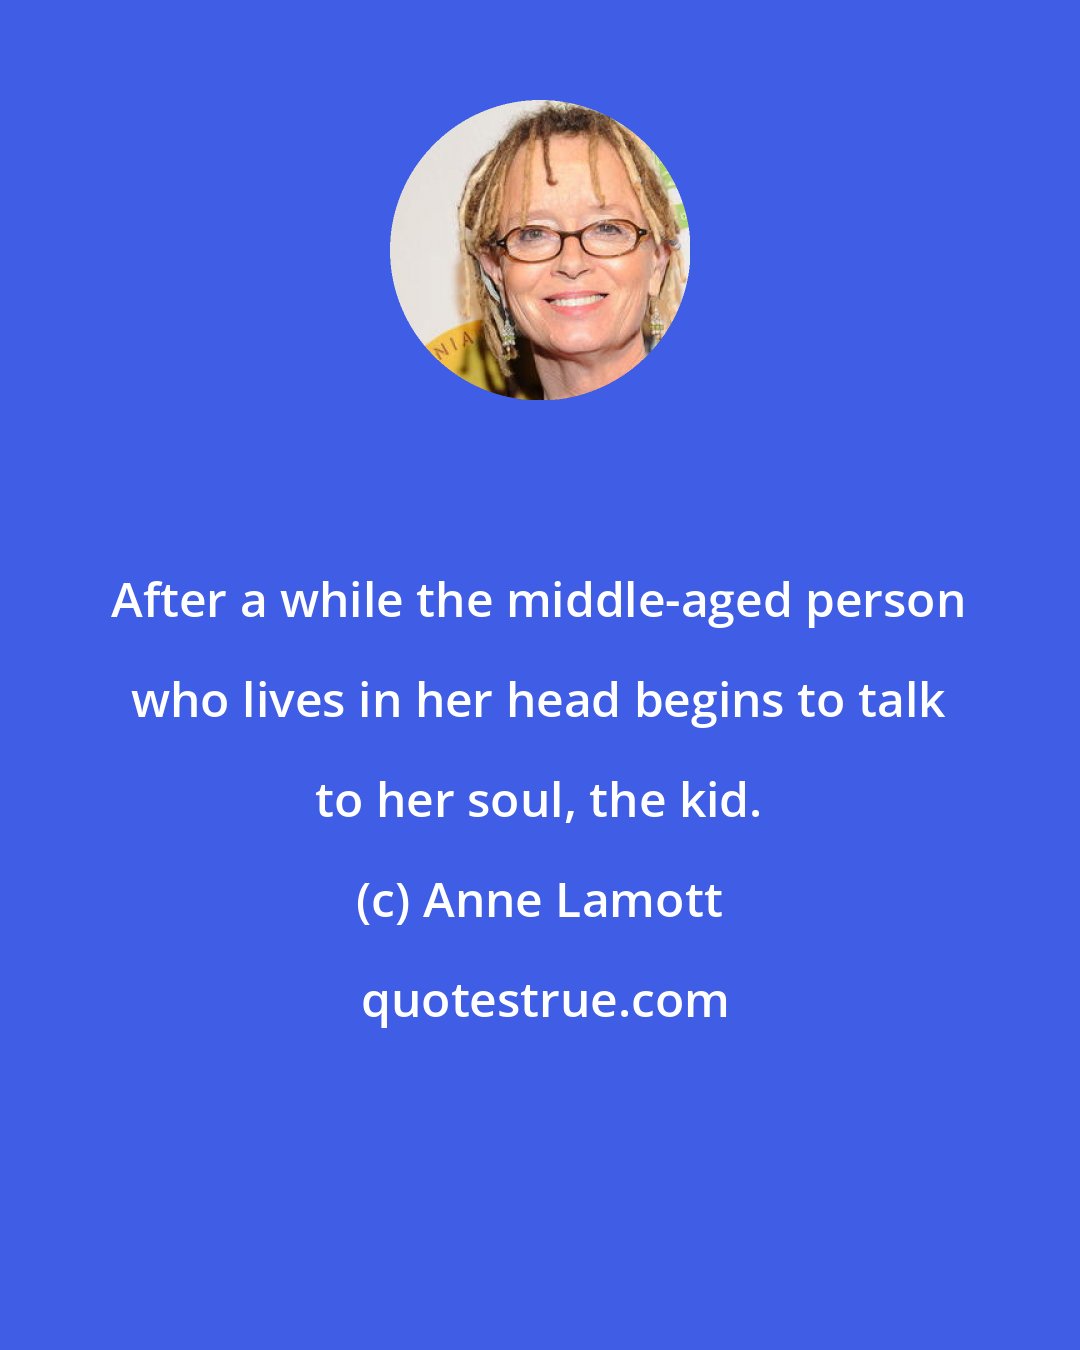 Anne Lamott: After a while the middle-aged person who lives in her head begins to talk to her soul, the kid.